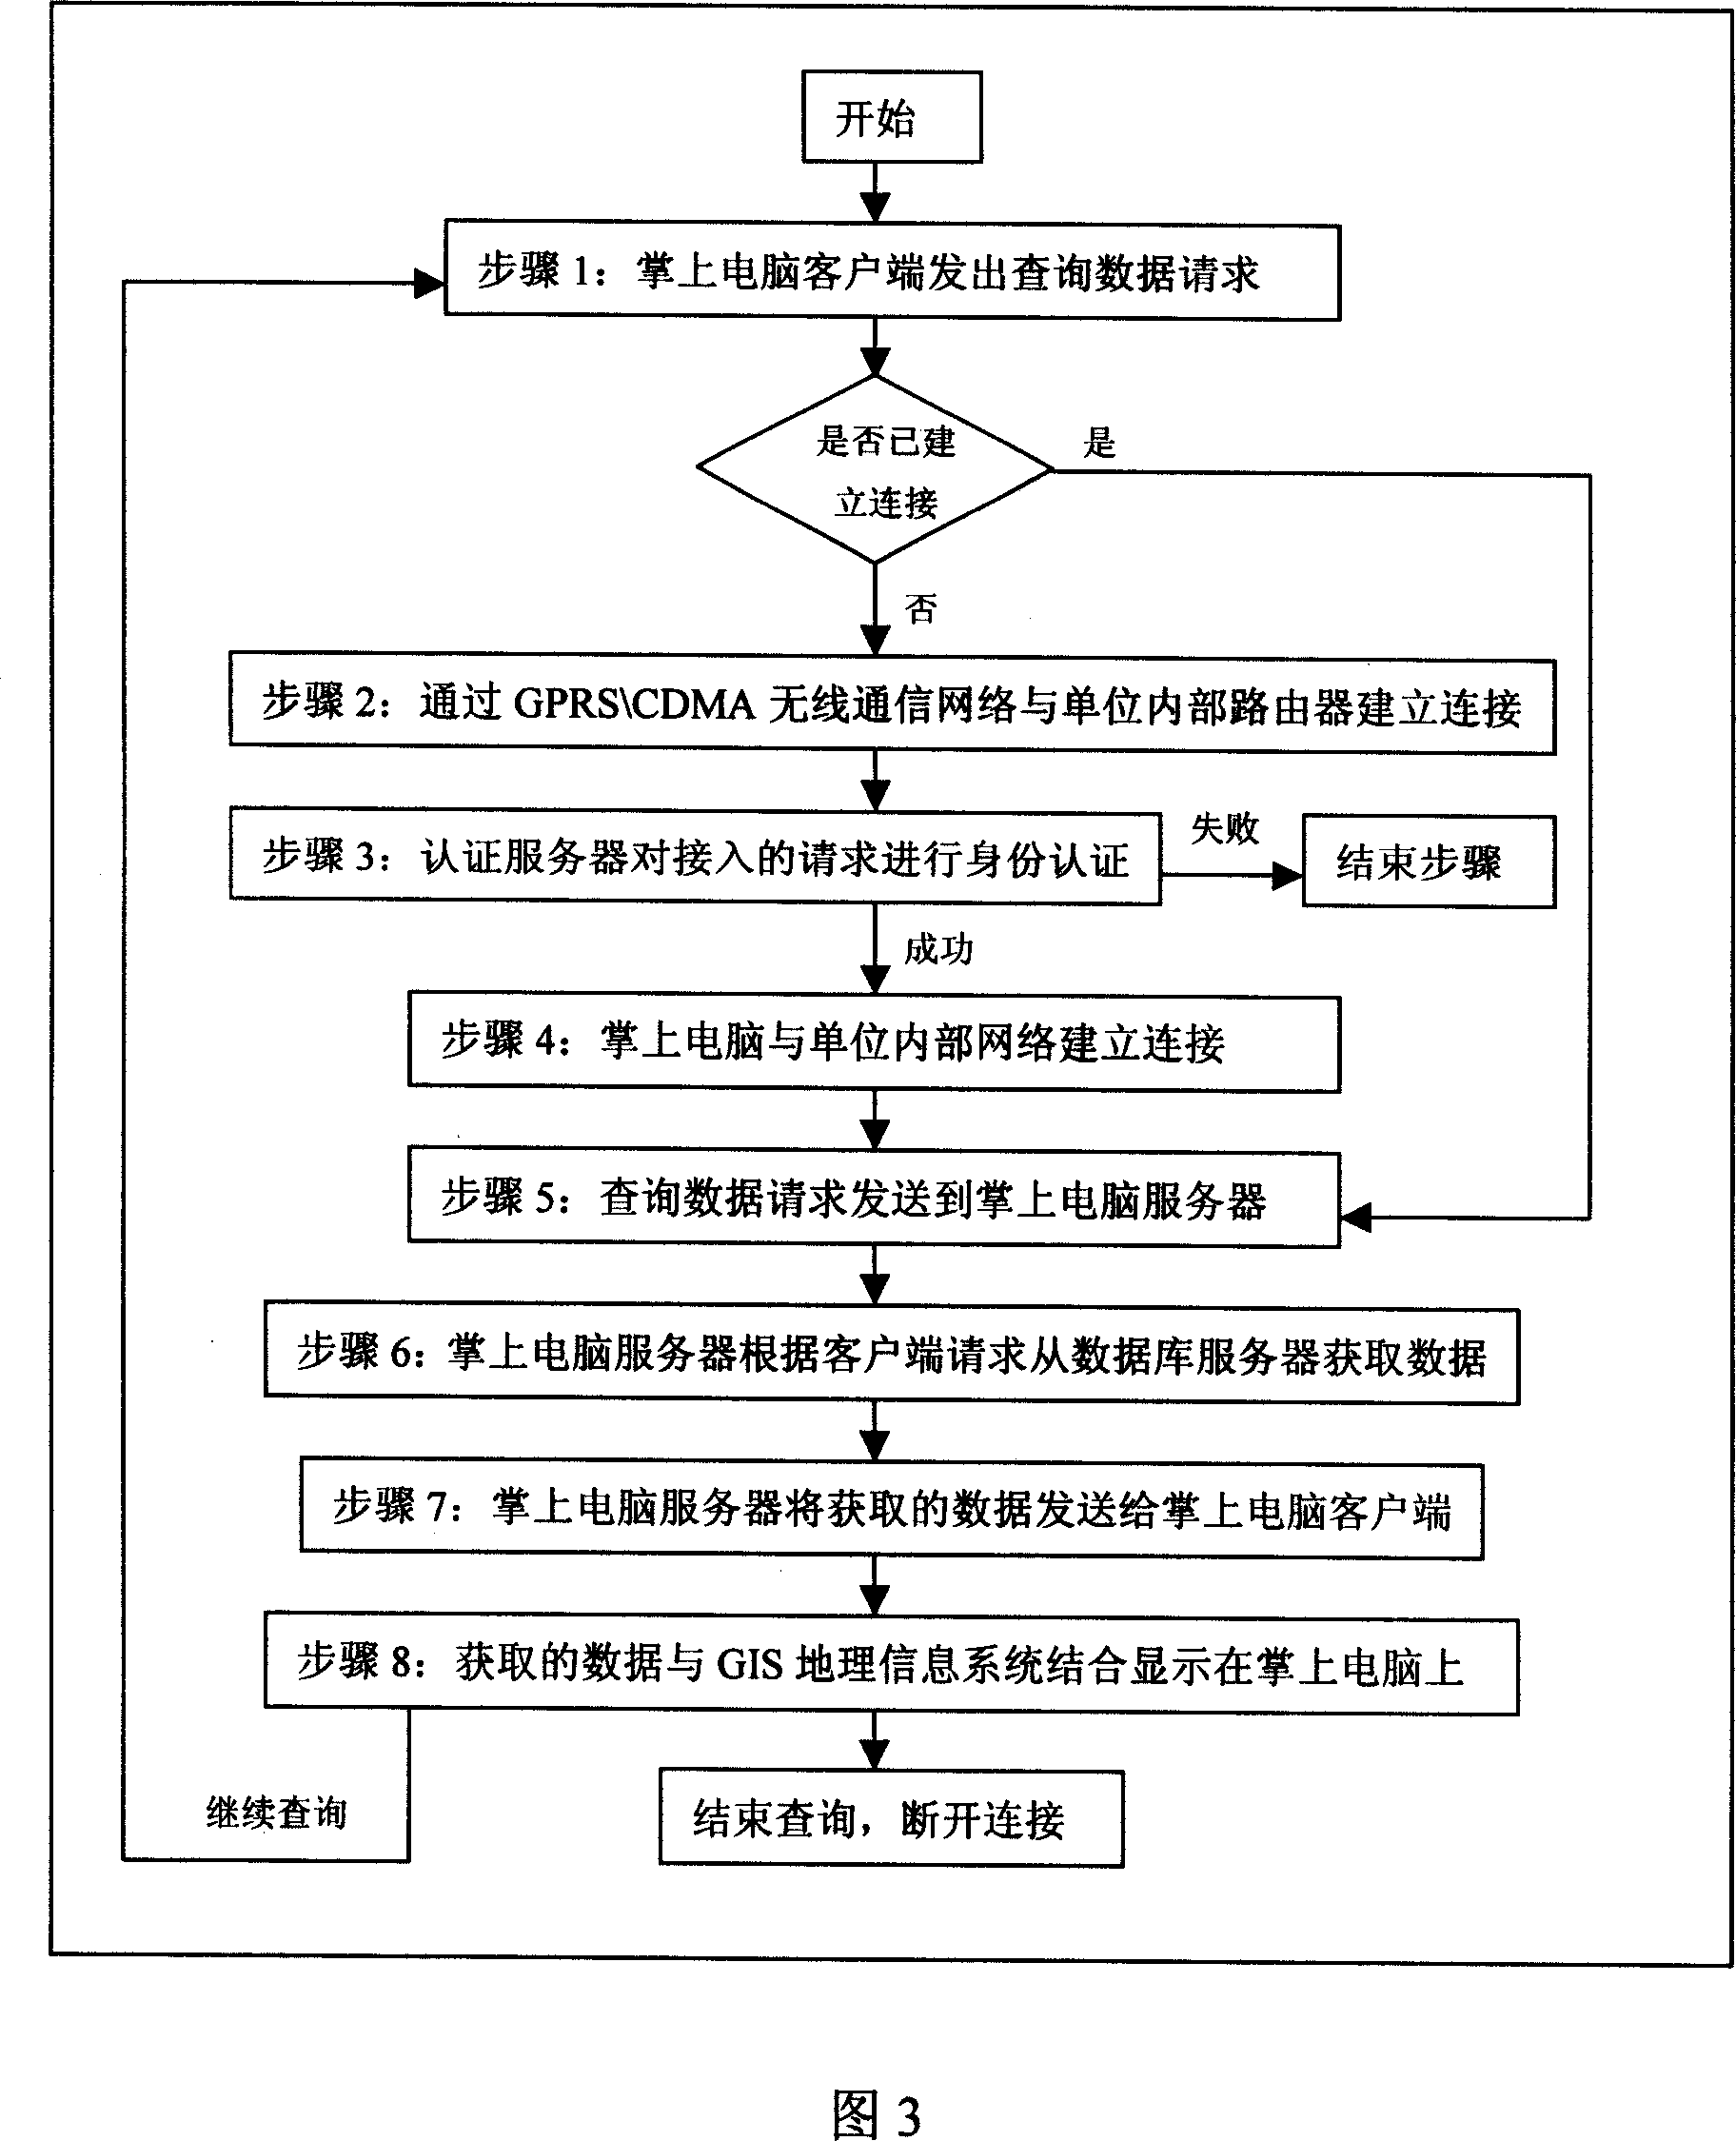 Mobile comprehensive service processing programme, system and data searching and updating method